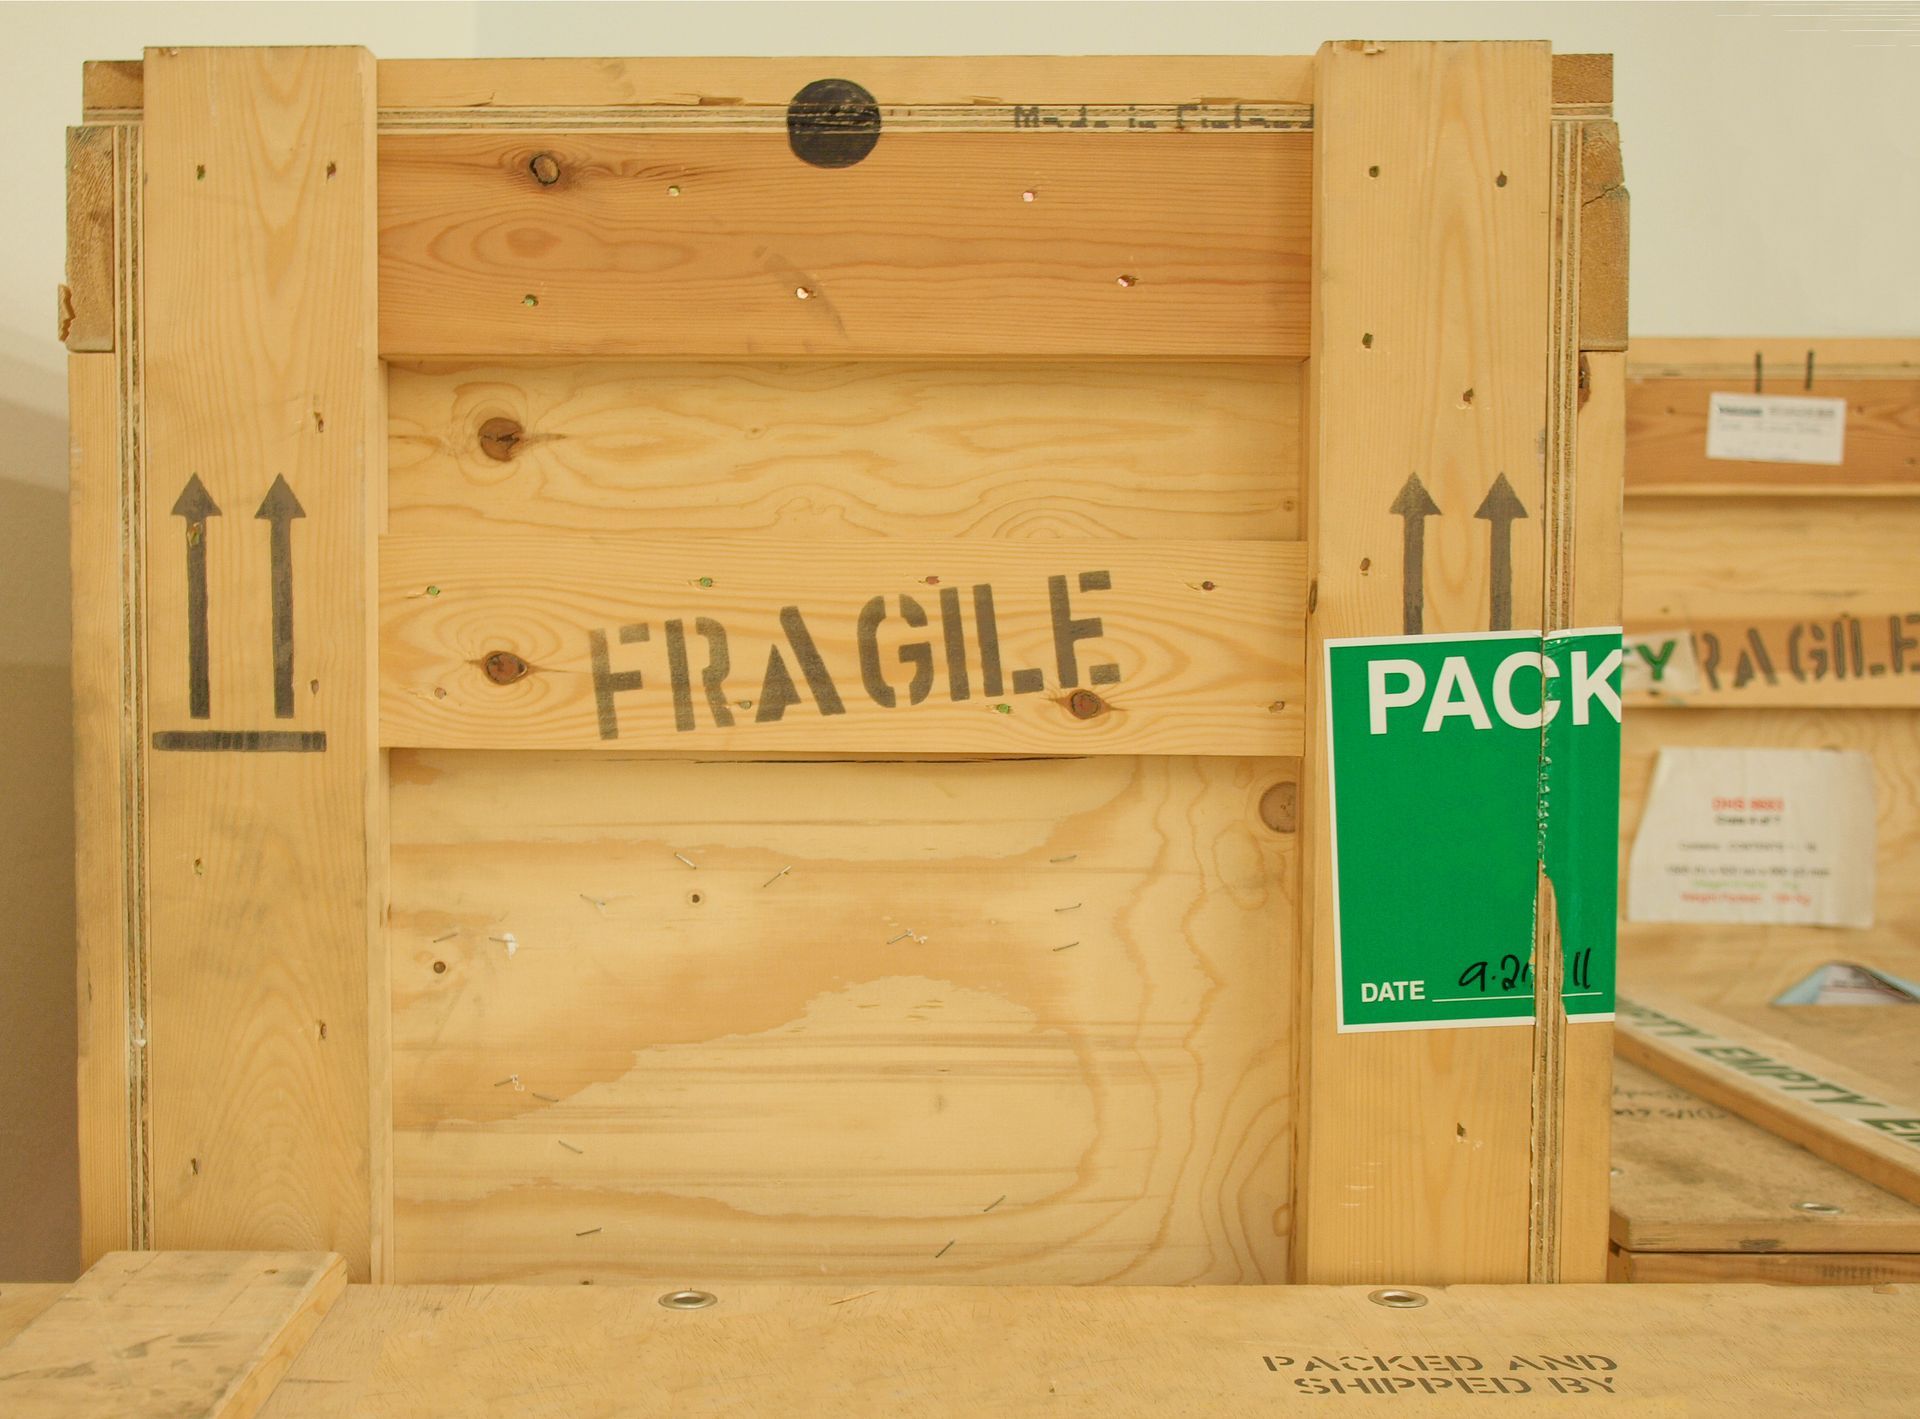 a wooden crate with fragile written on it